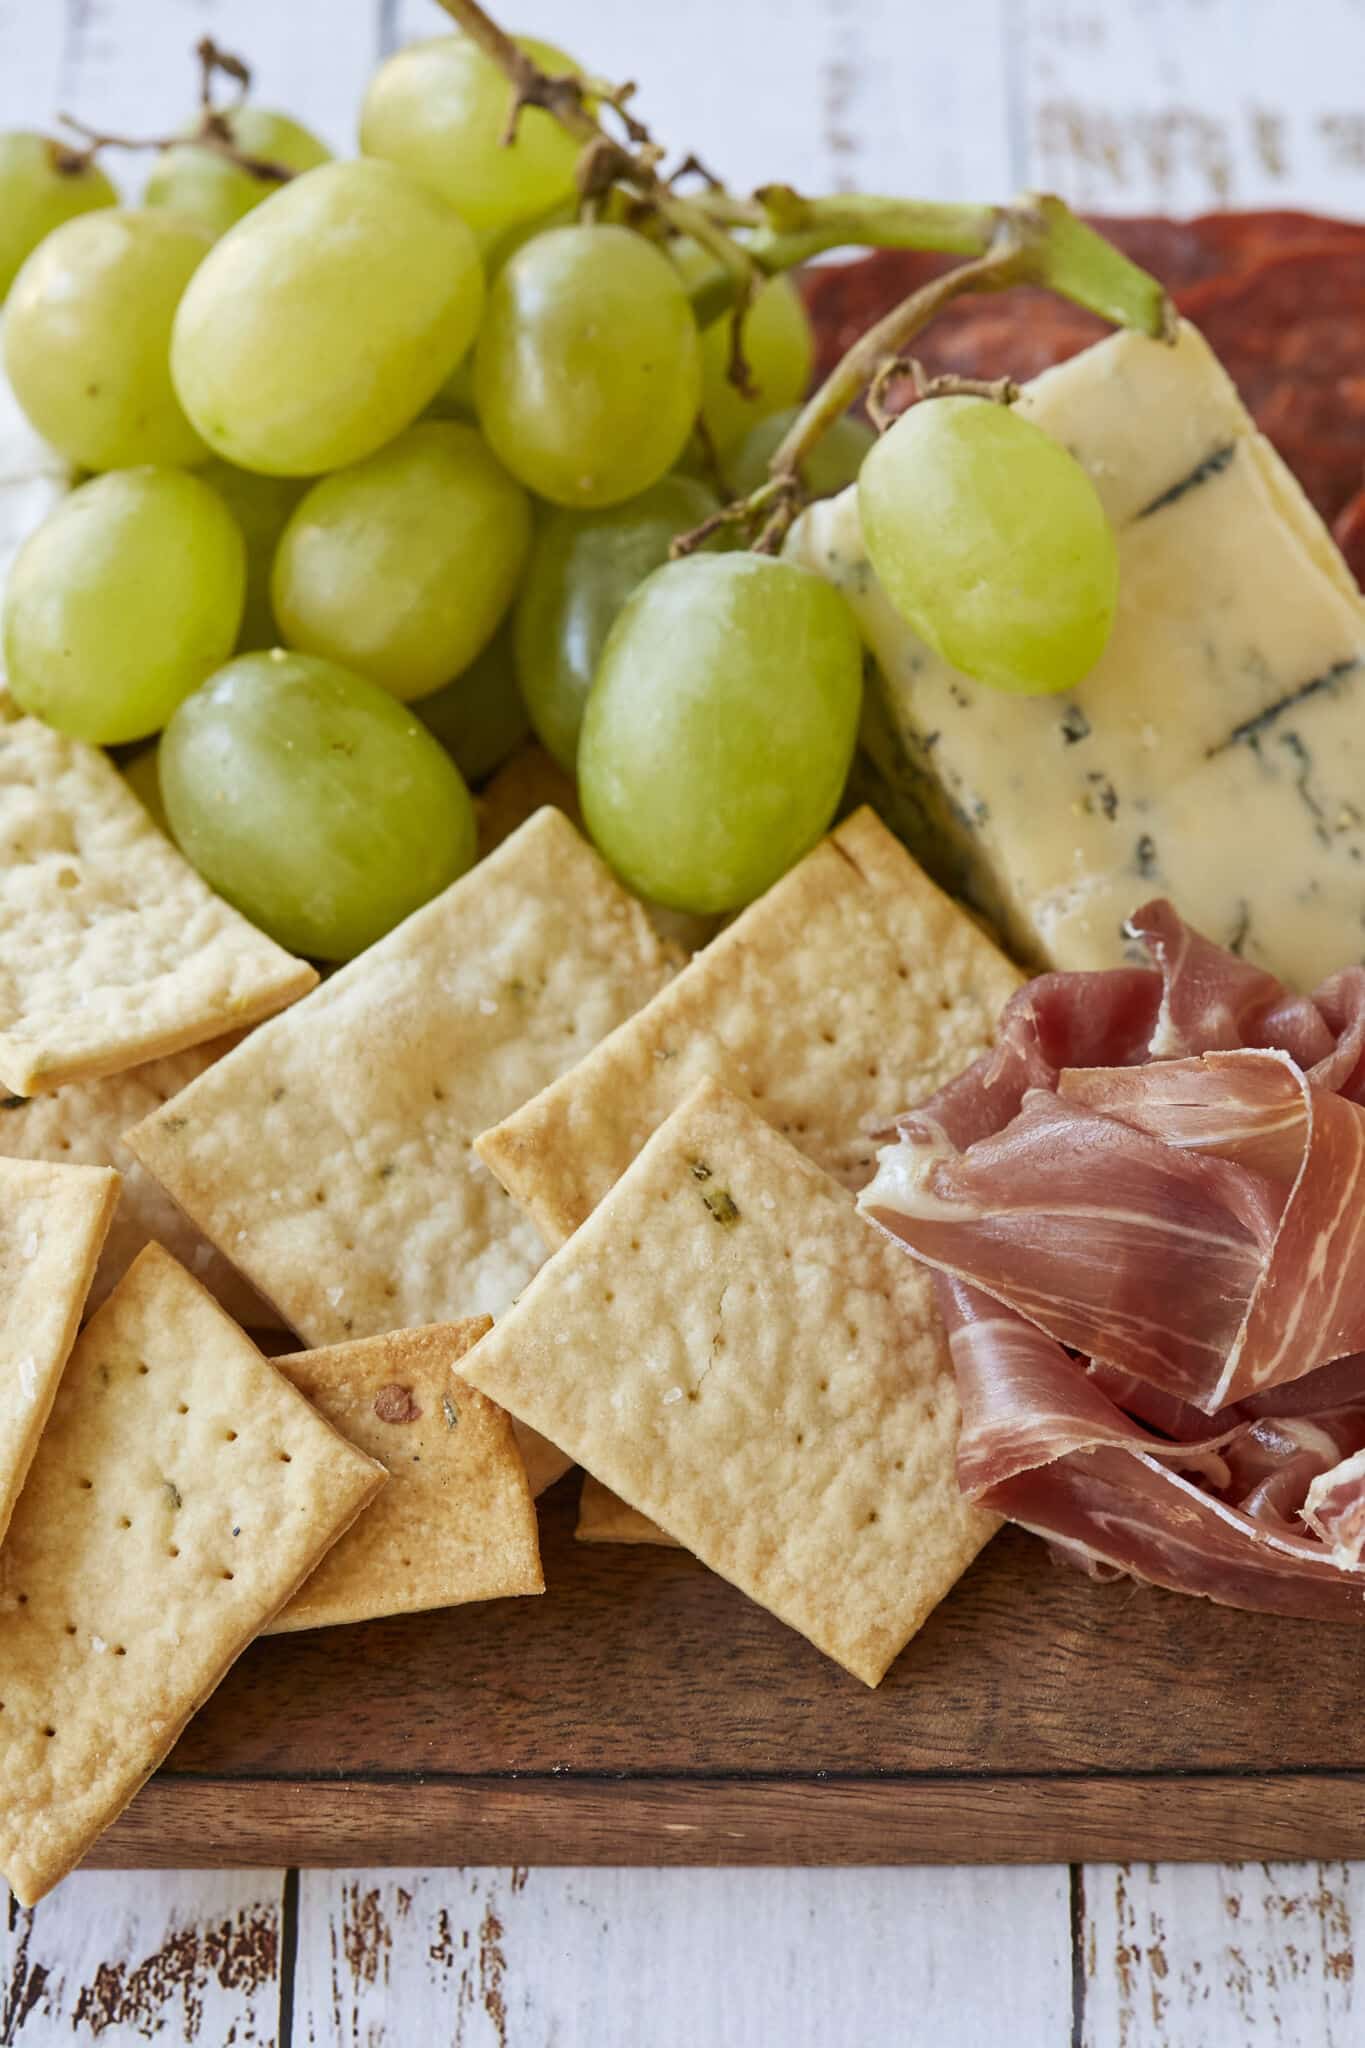 Homemade Sourdough Crackers are served on a charcuterie board with green grapes, prosciutto, cheese and salami.